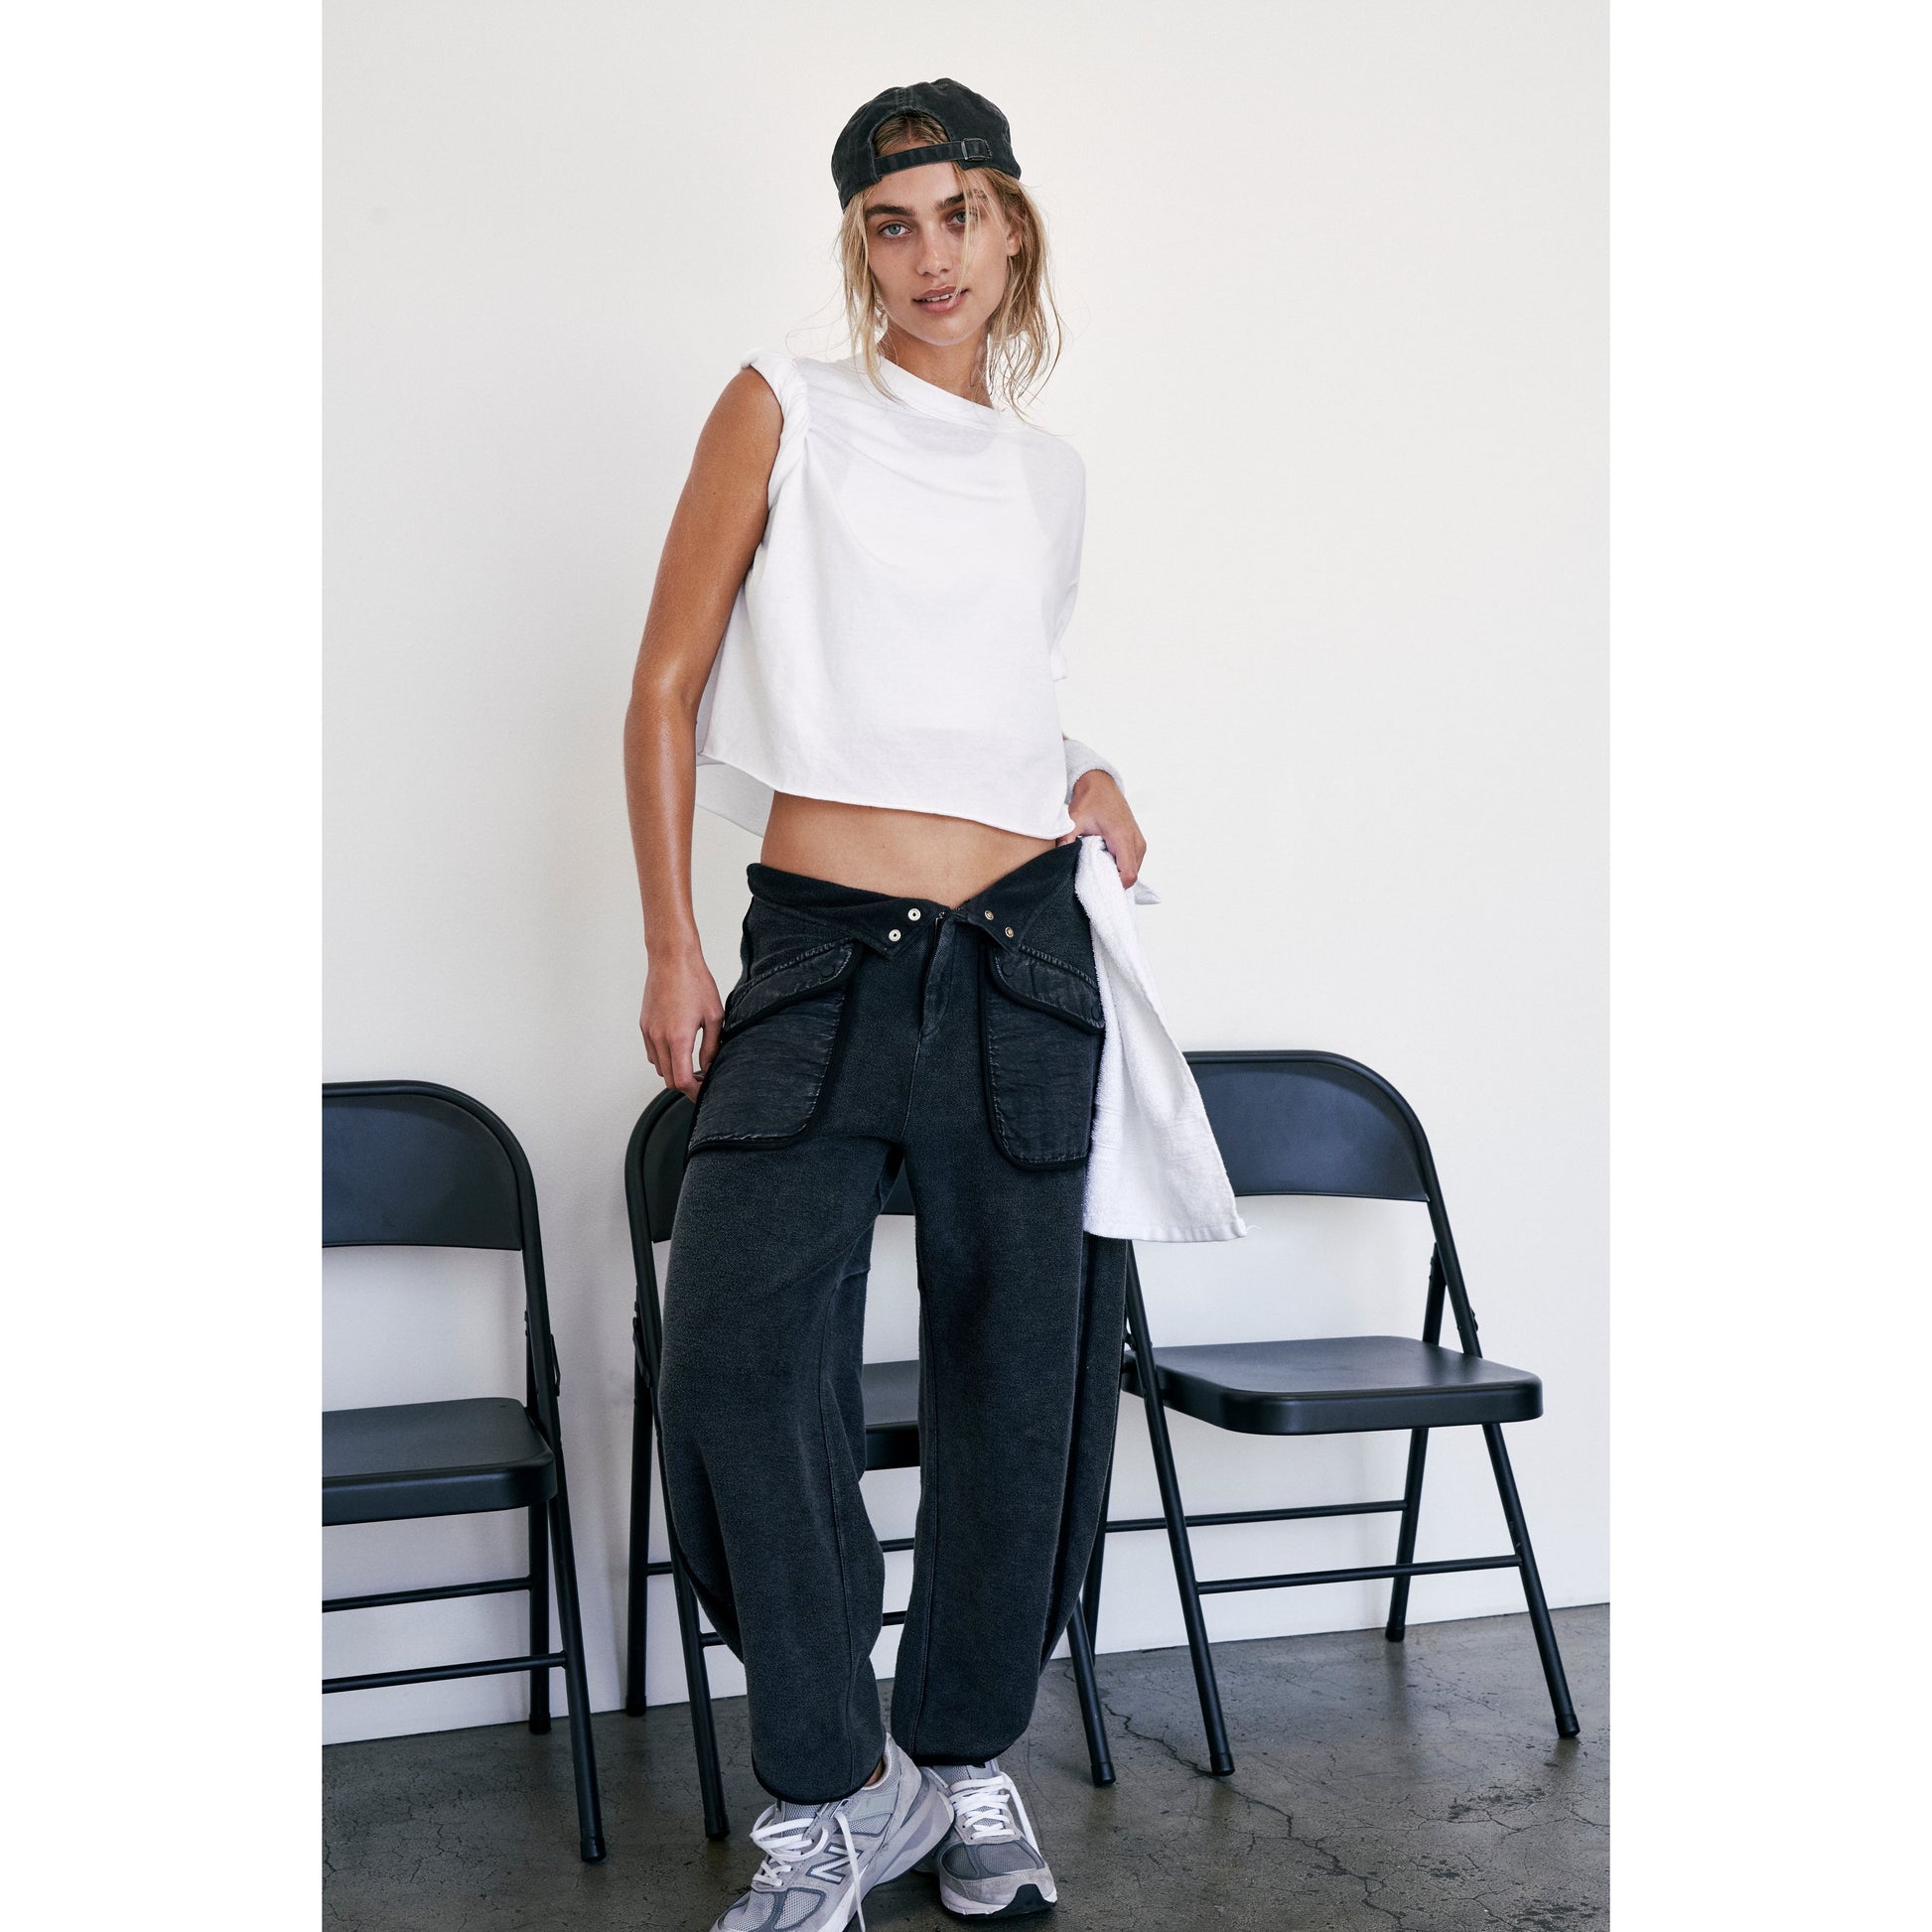 Young woman in a Free People Movement white Inspire Tee and dark jeans standing beside metal chairs, wearing a backward cap and sneakers.